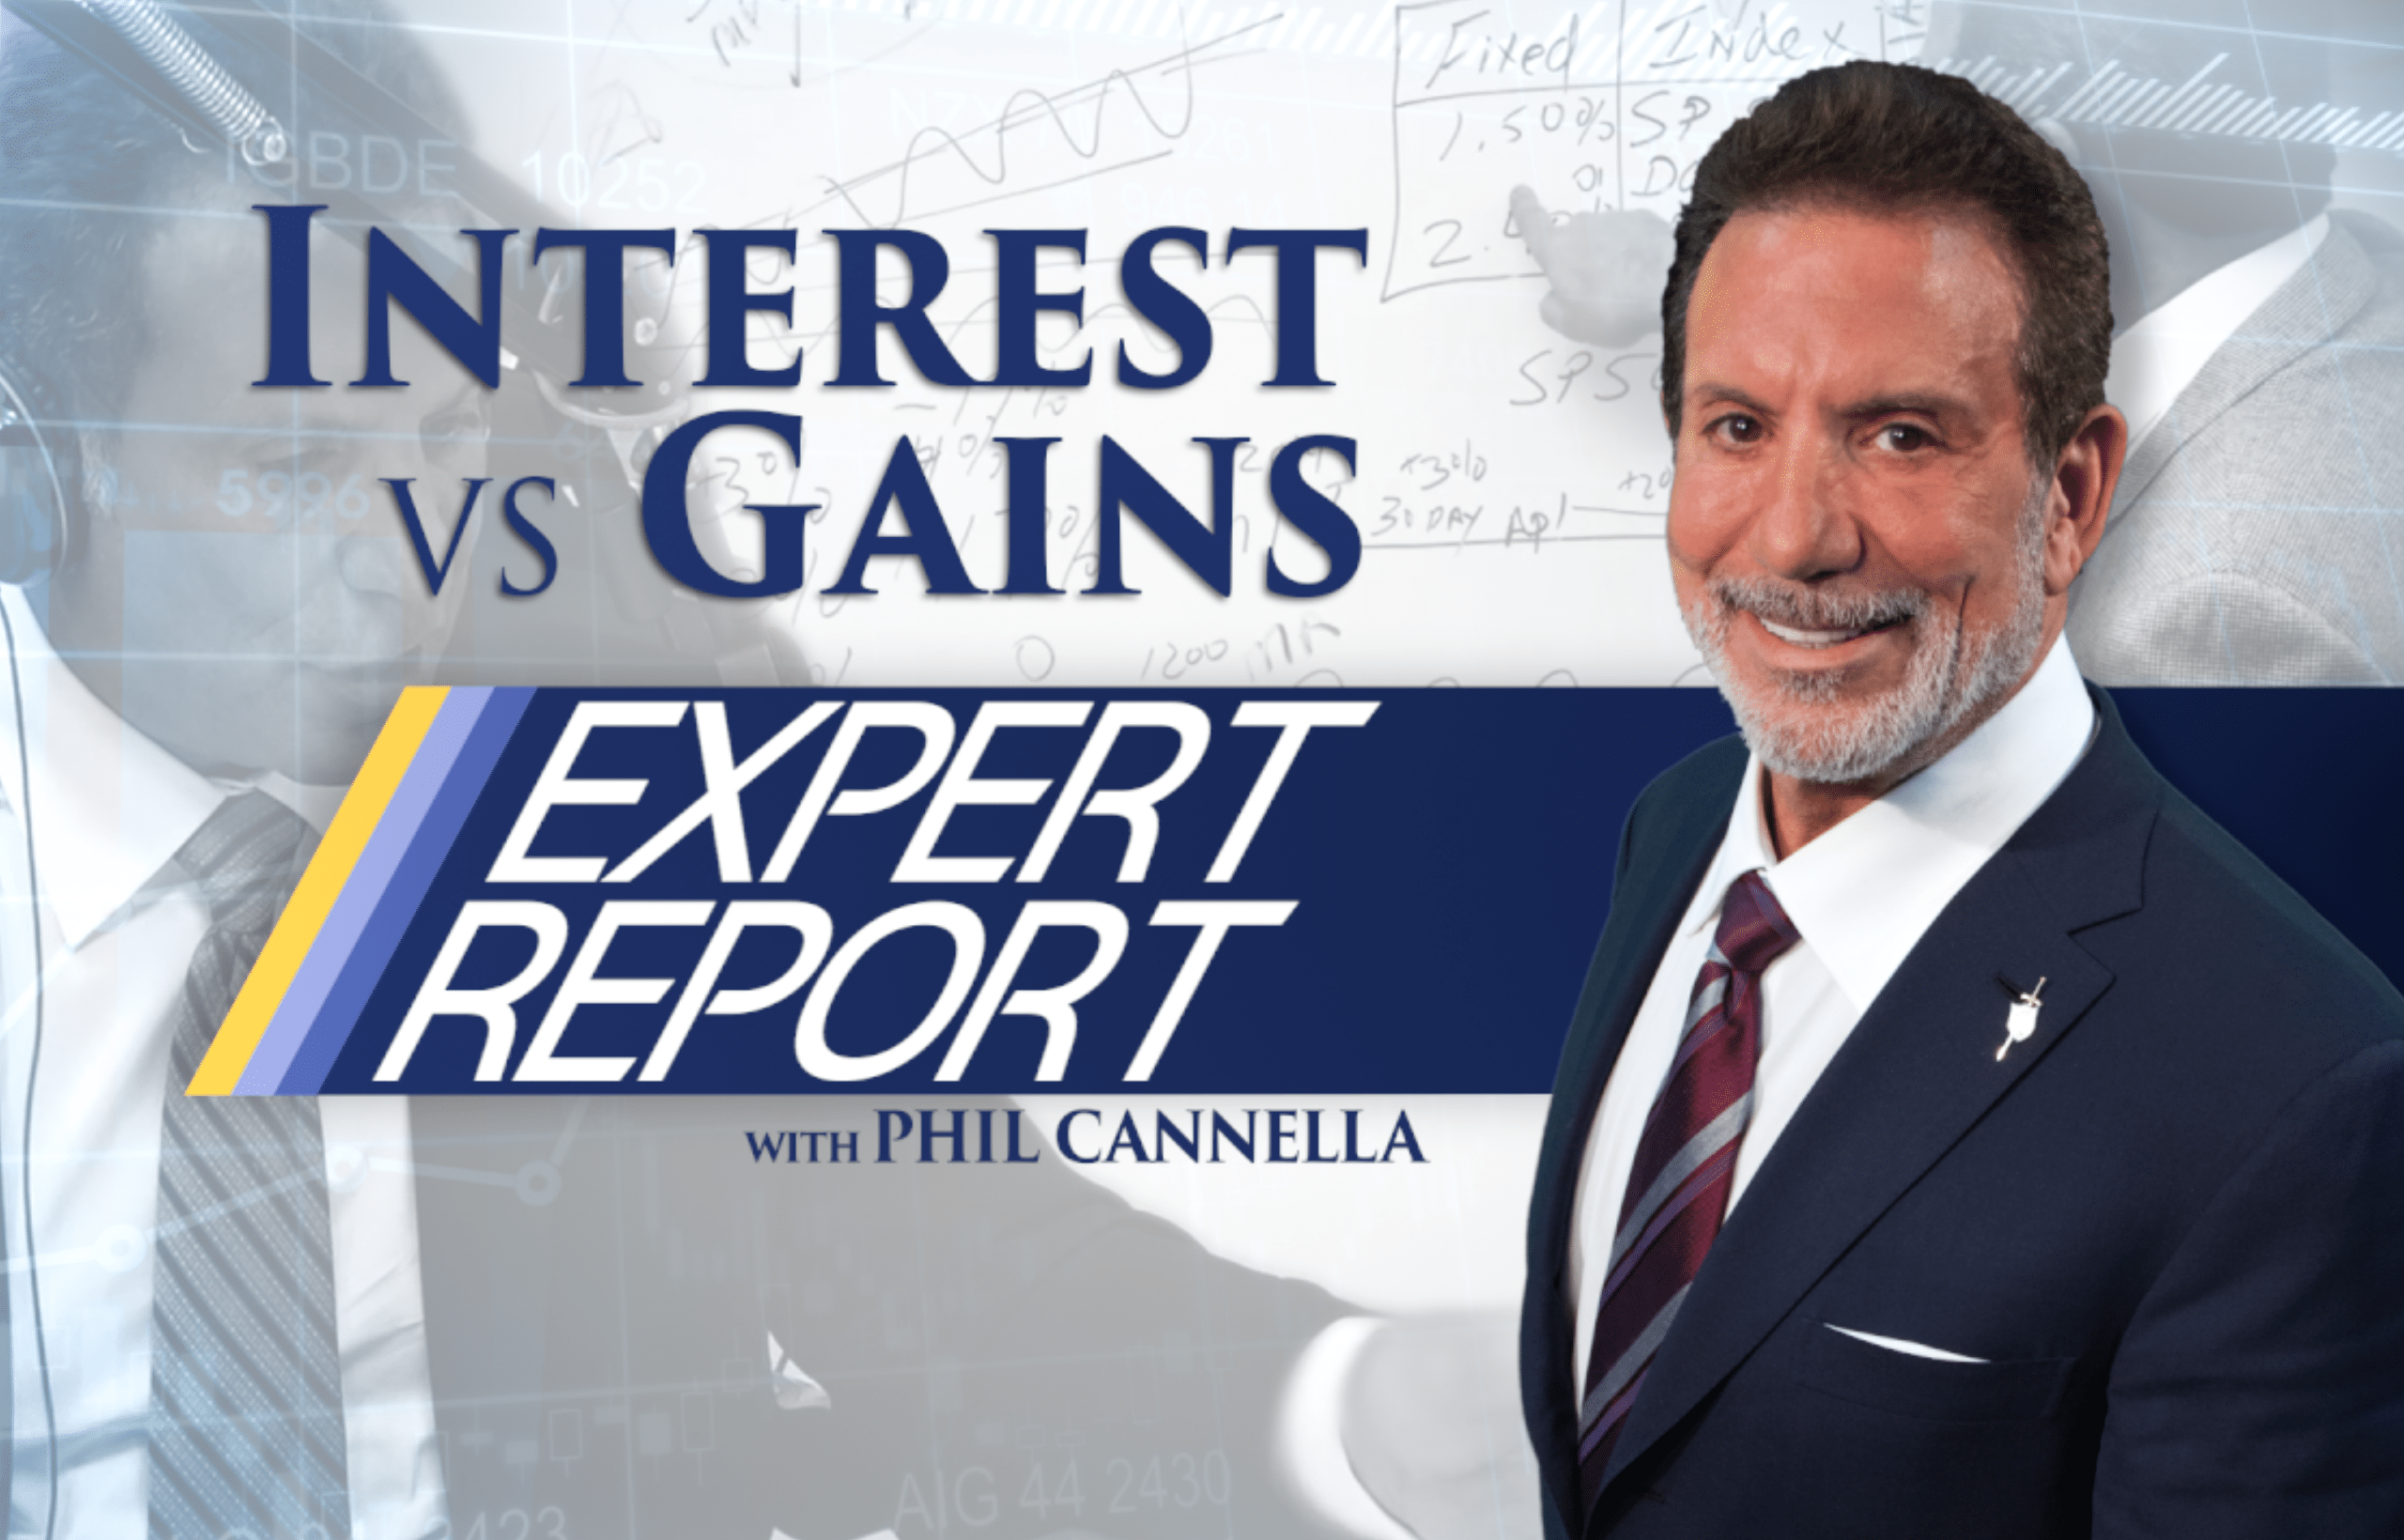 Expert Report: The Difference Between Interest Credited and Gains on Wall Street.